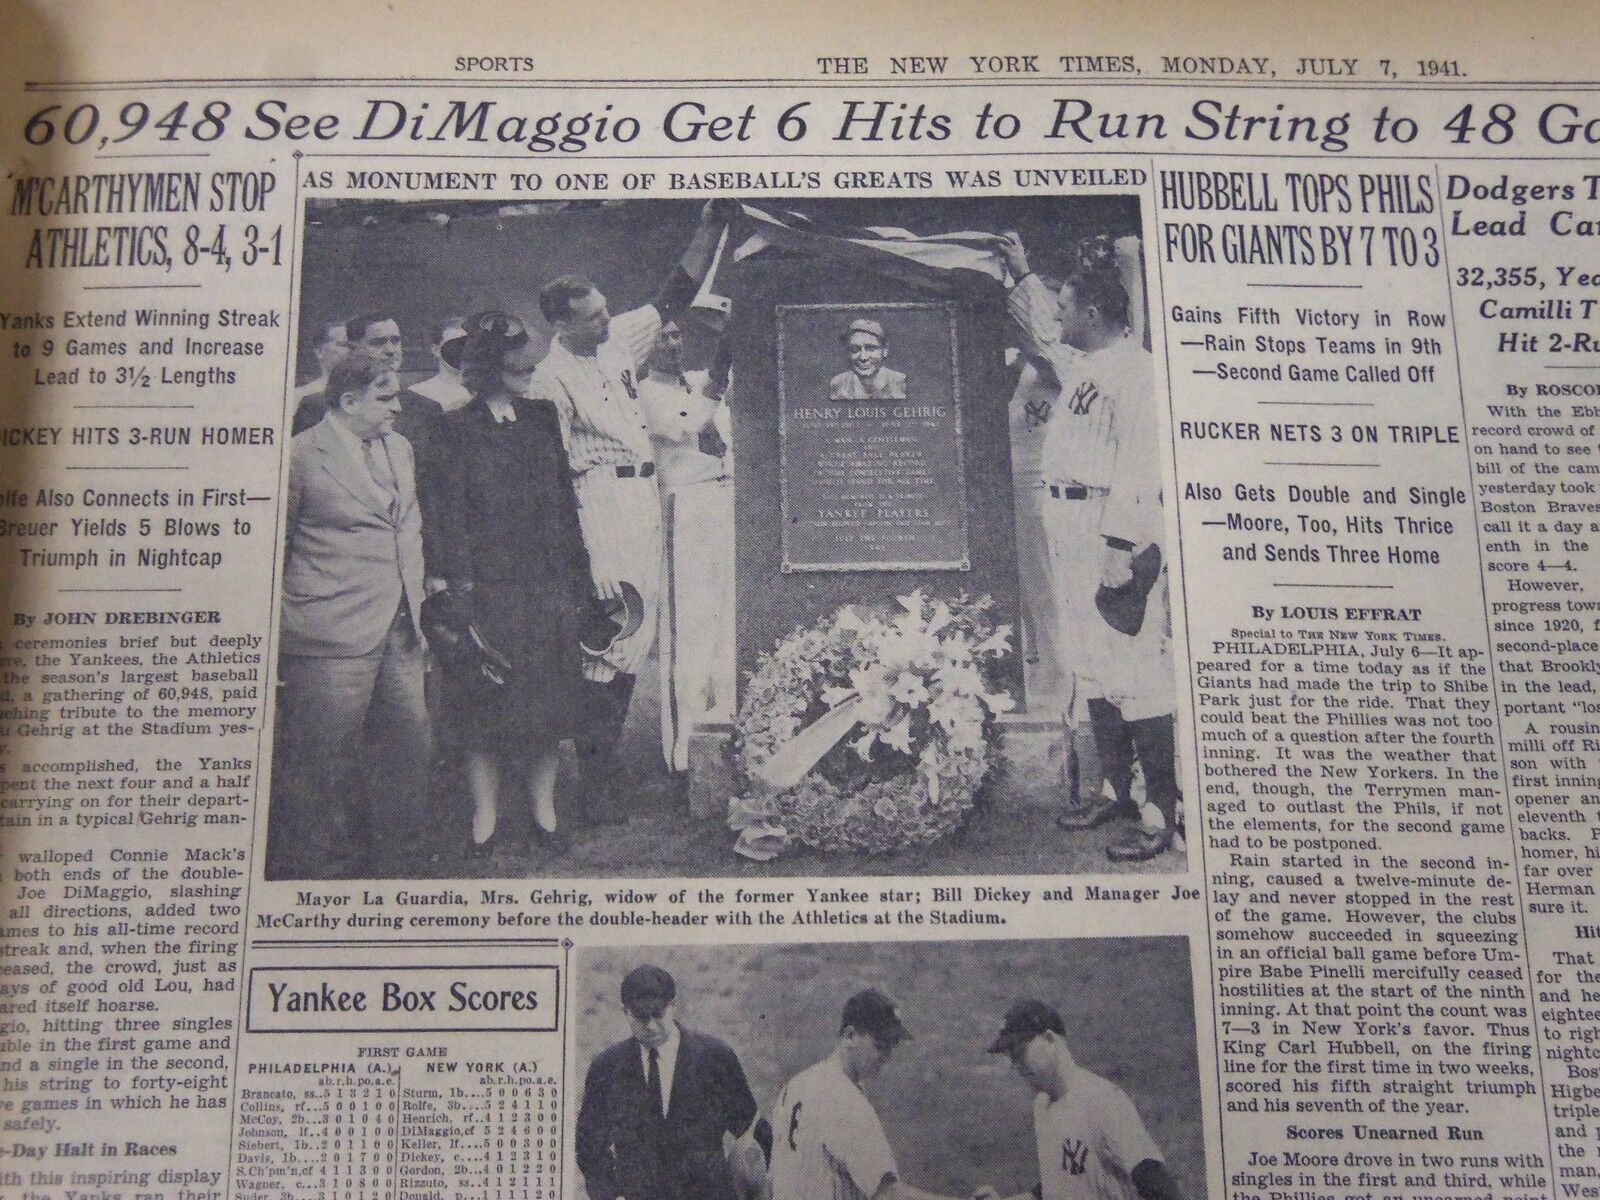 1941 JULY 7 NEW YORK TIMES - LOU GEHRIG MONUMENT UNVEILED - NT 5151